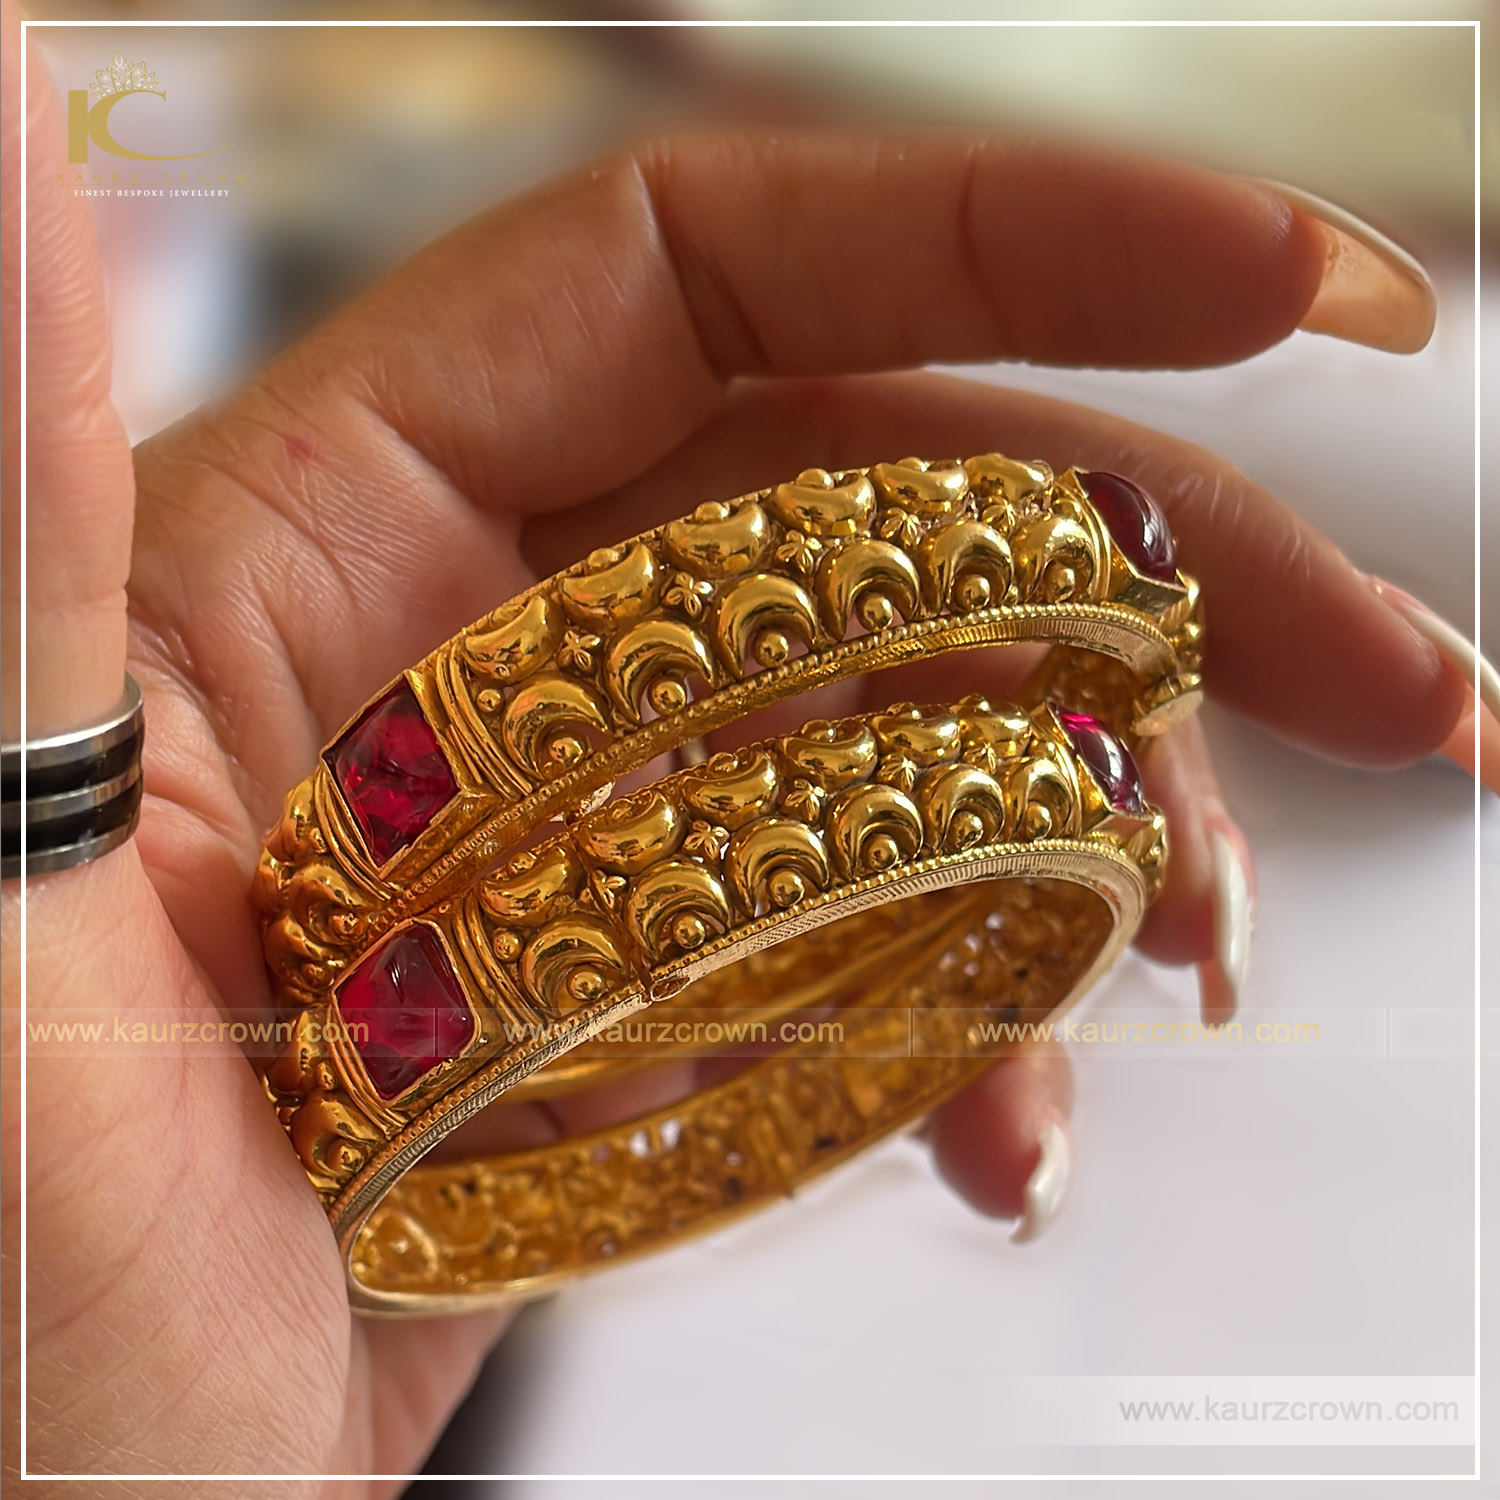 Mehtab Traditional Antique Gold Plated Bangles , kaurz crown , punjabi jewellery , gold plated , online jewellery store , jewellery store